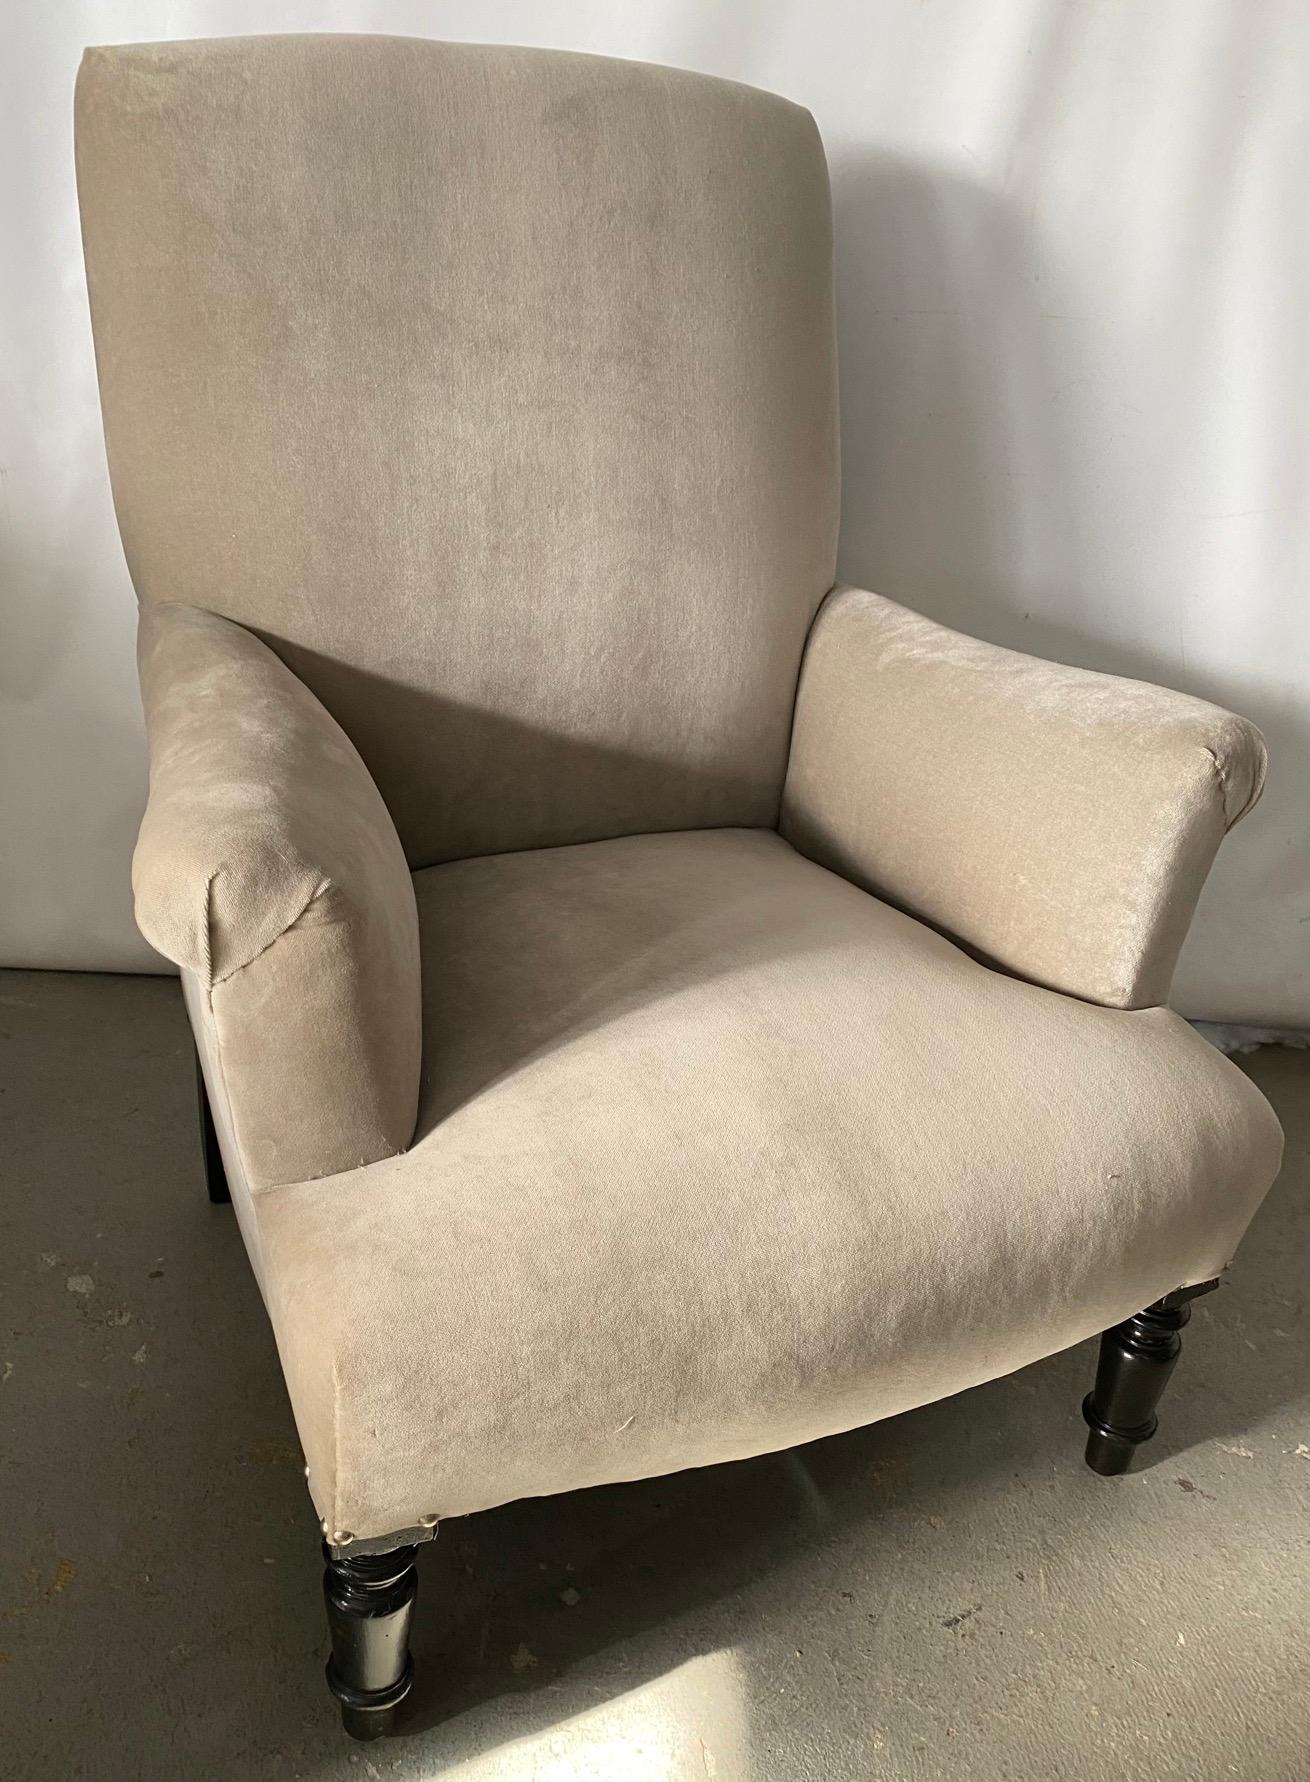 A fabulous pair of low back upholstered chairs, nicely wide seating area, comfortable design with ebonized turned wood legs, upholstered in a pale green/grey velvet. The two chairs are very similar but not exactly the same in size. Chairs can be